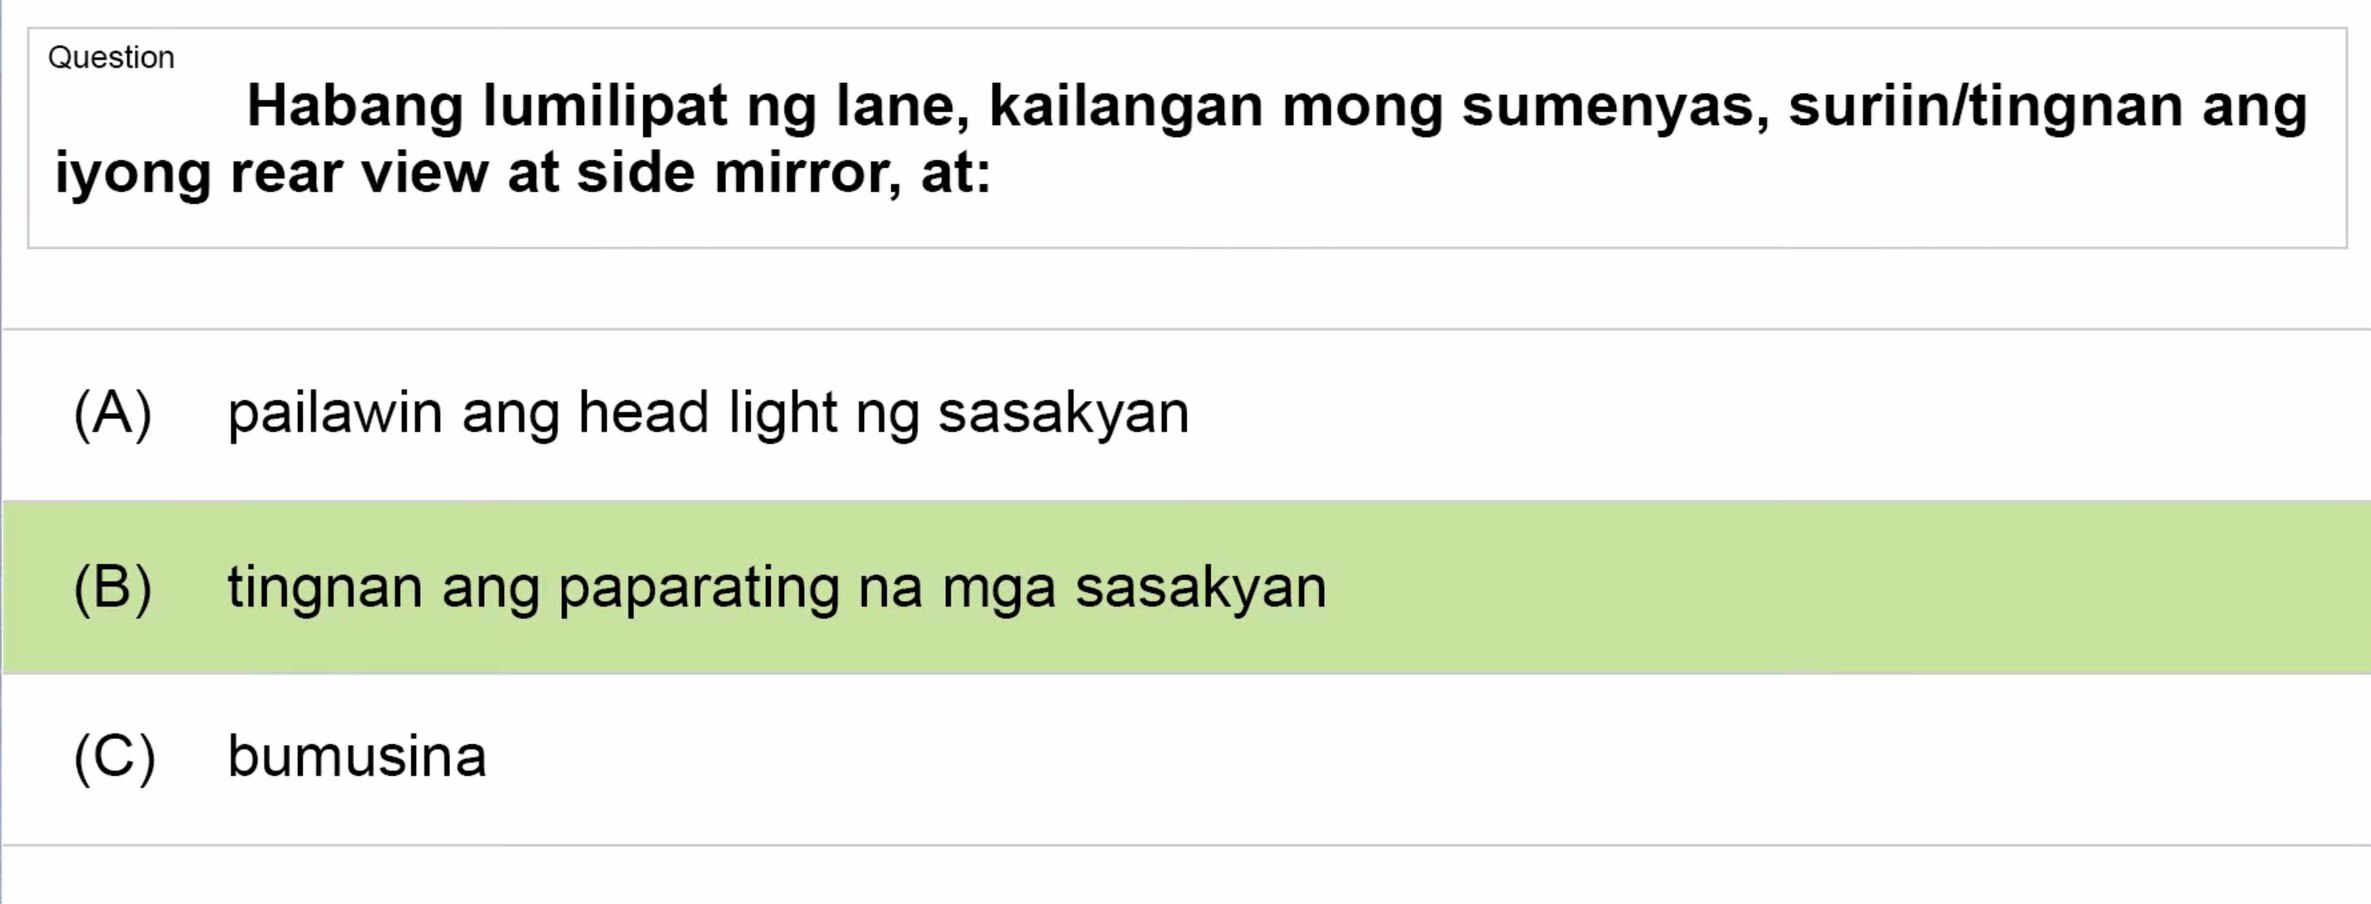 LTO Tagalog non professional exam reviewer light vehicle 3 (21)